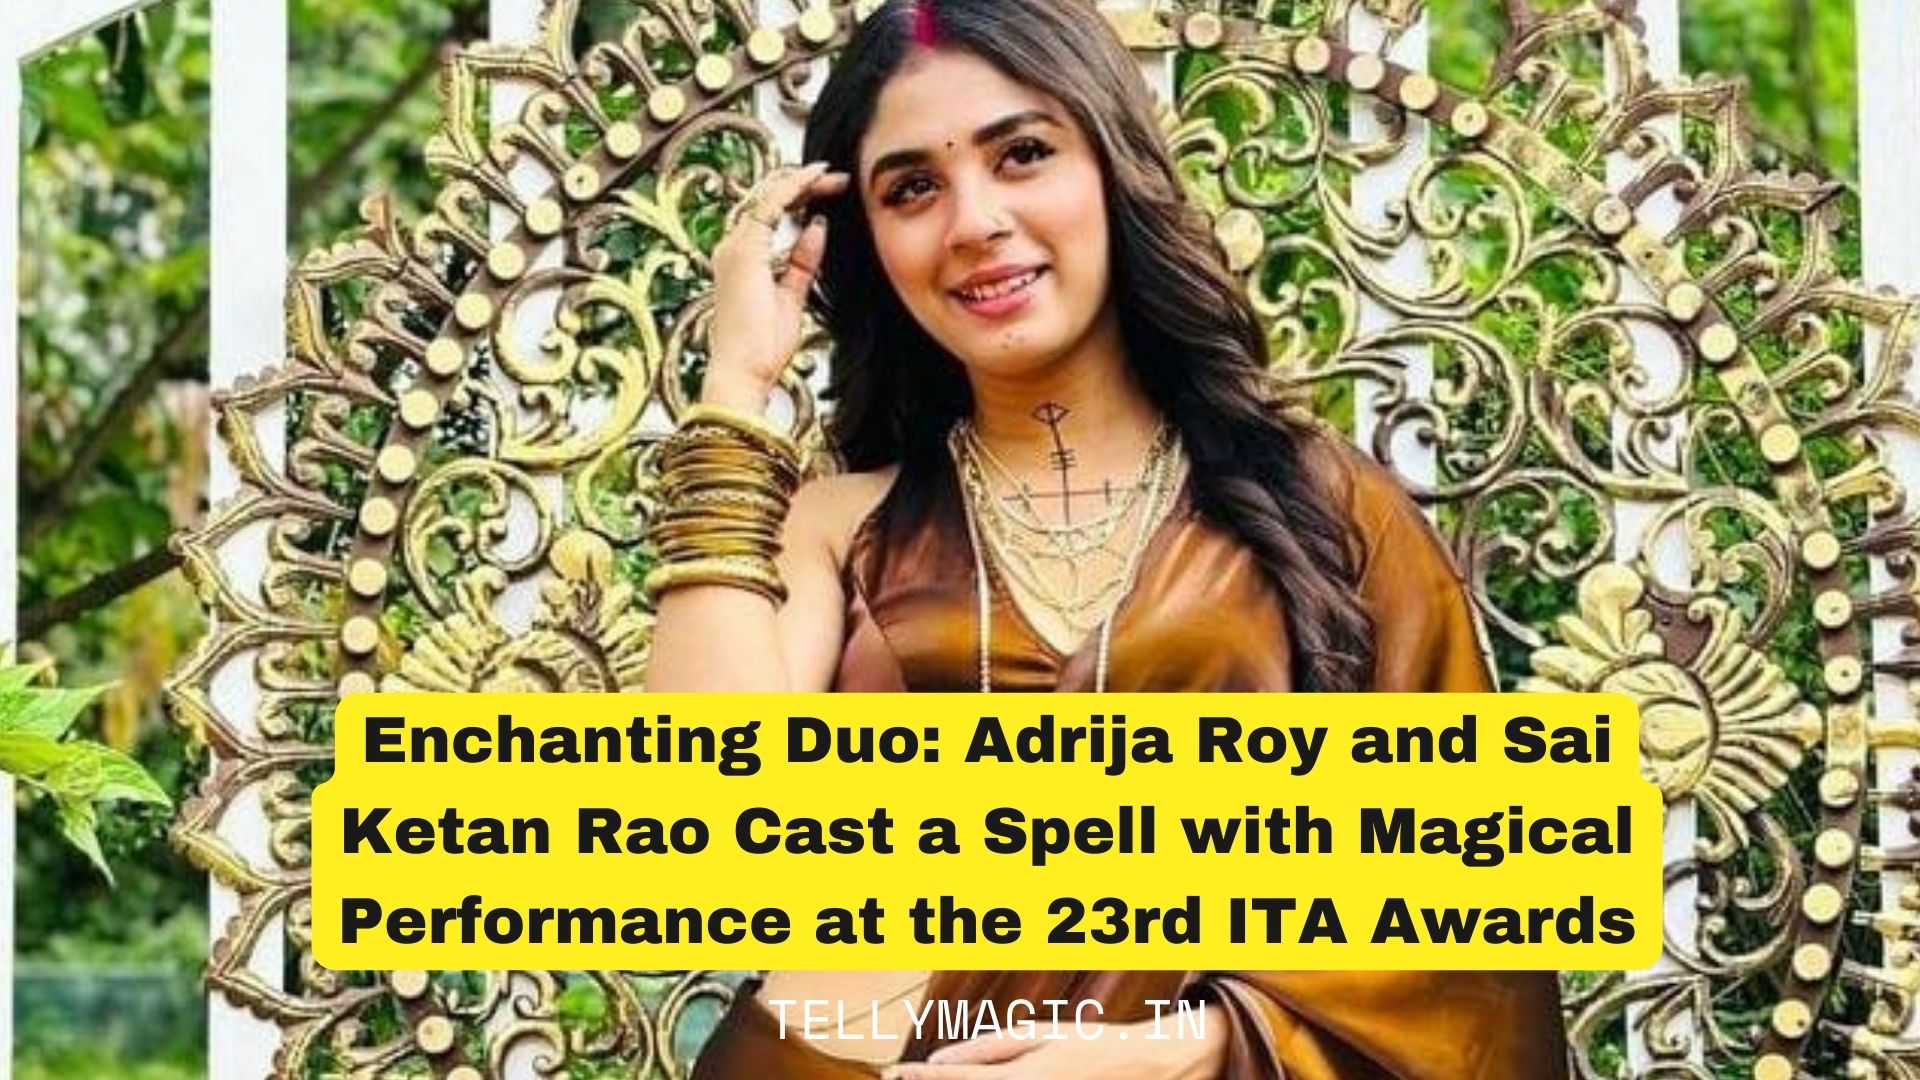 Enchanting Duo: Adrija Roy and Sai Ketan Rao Cast a Spell with Magical Performance at the 23rd ITA Awards